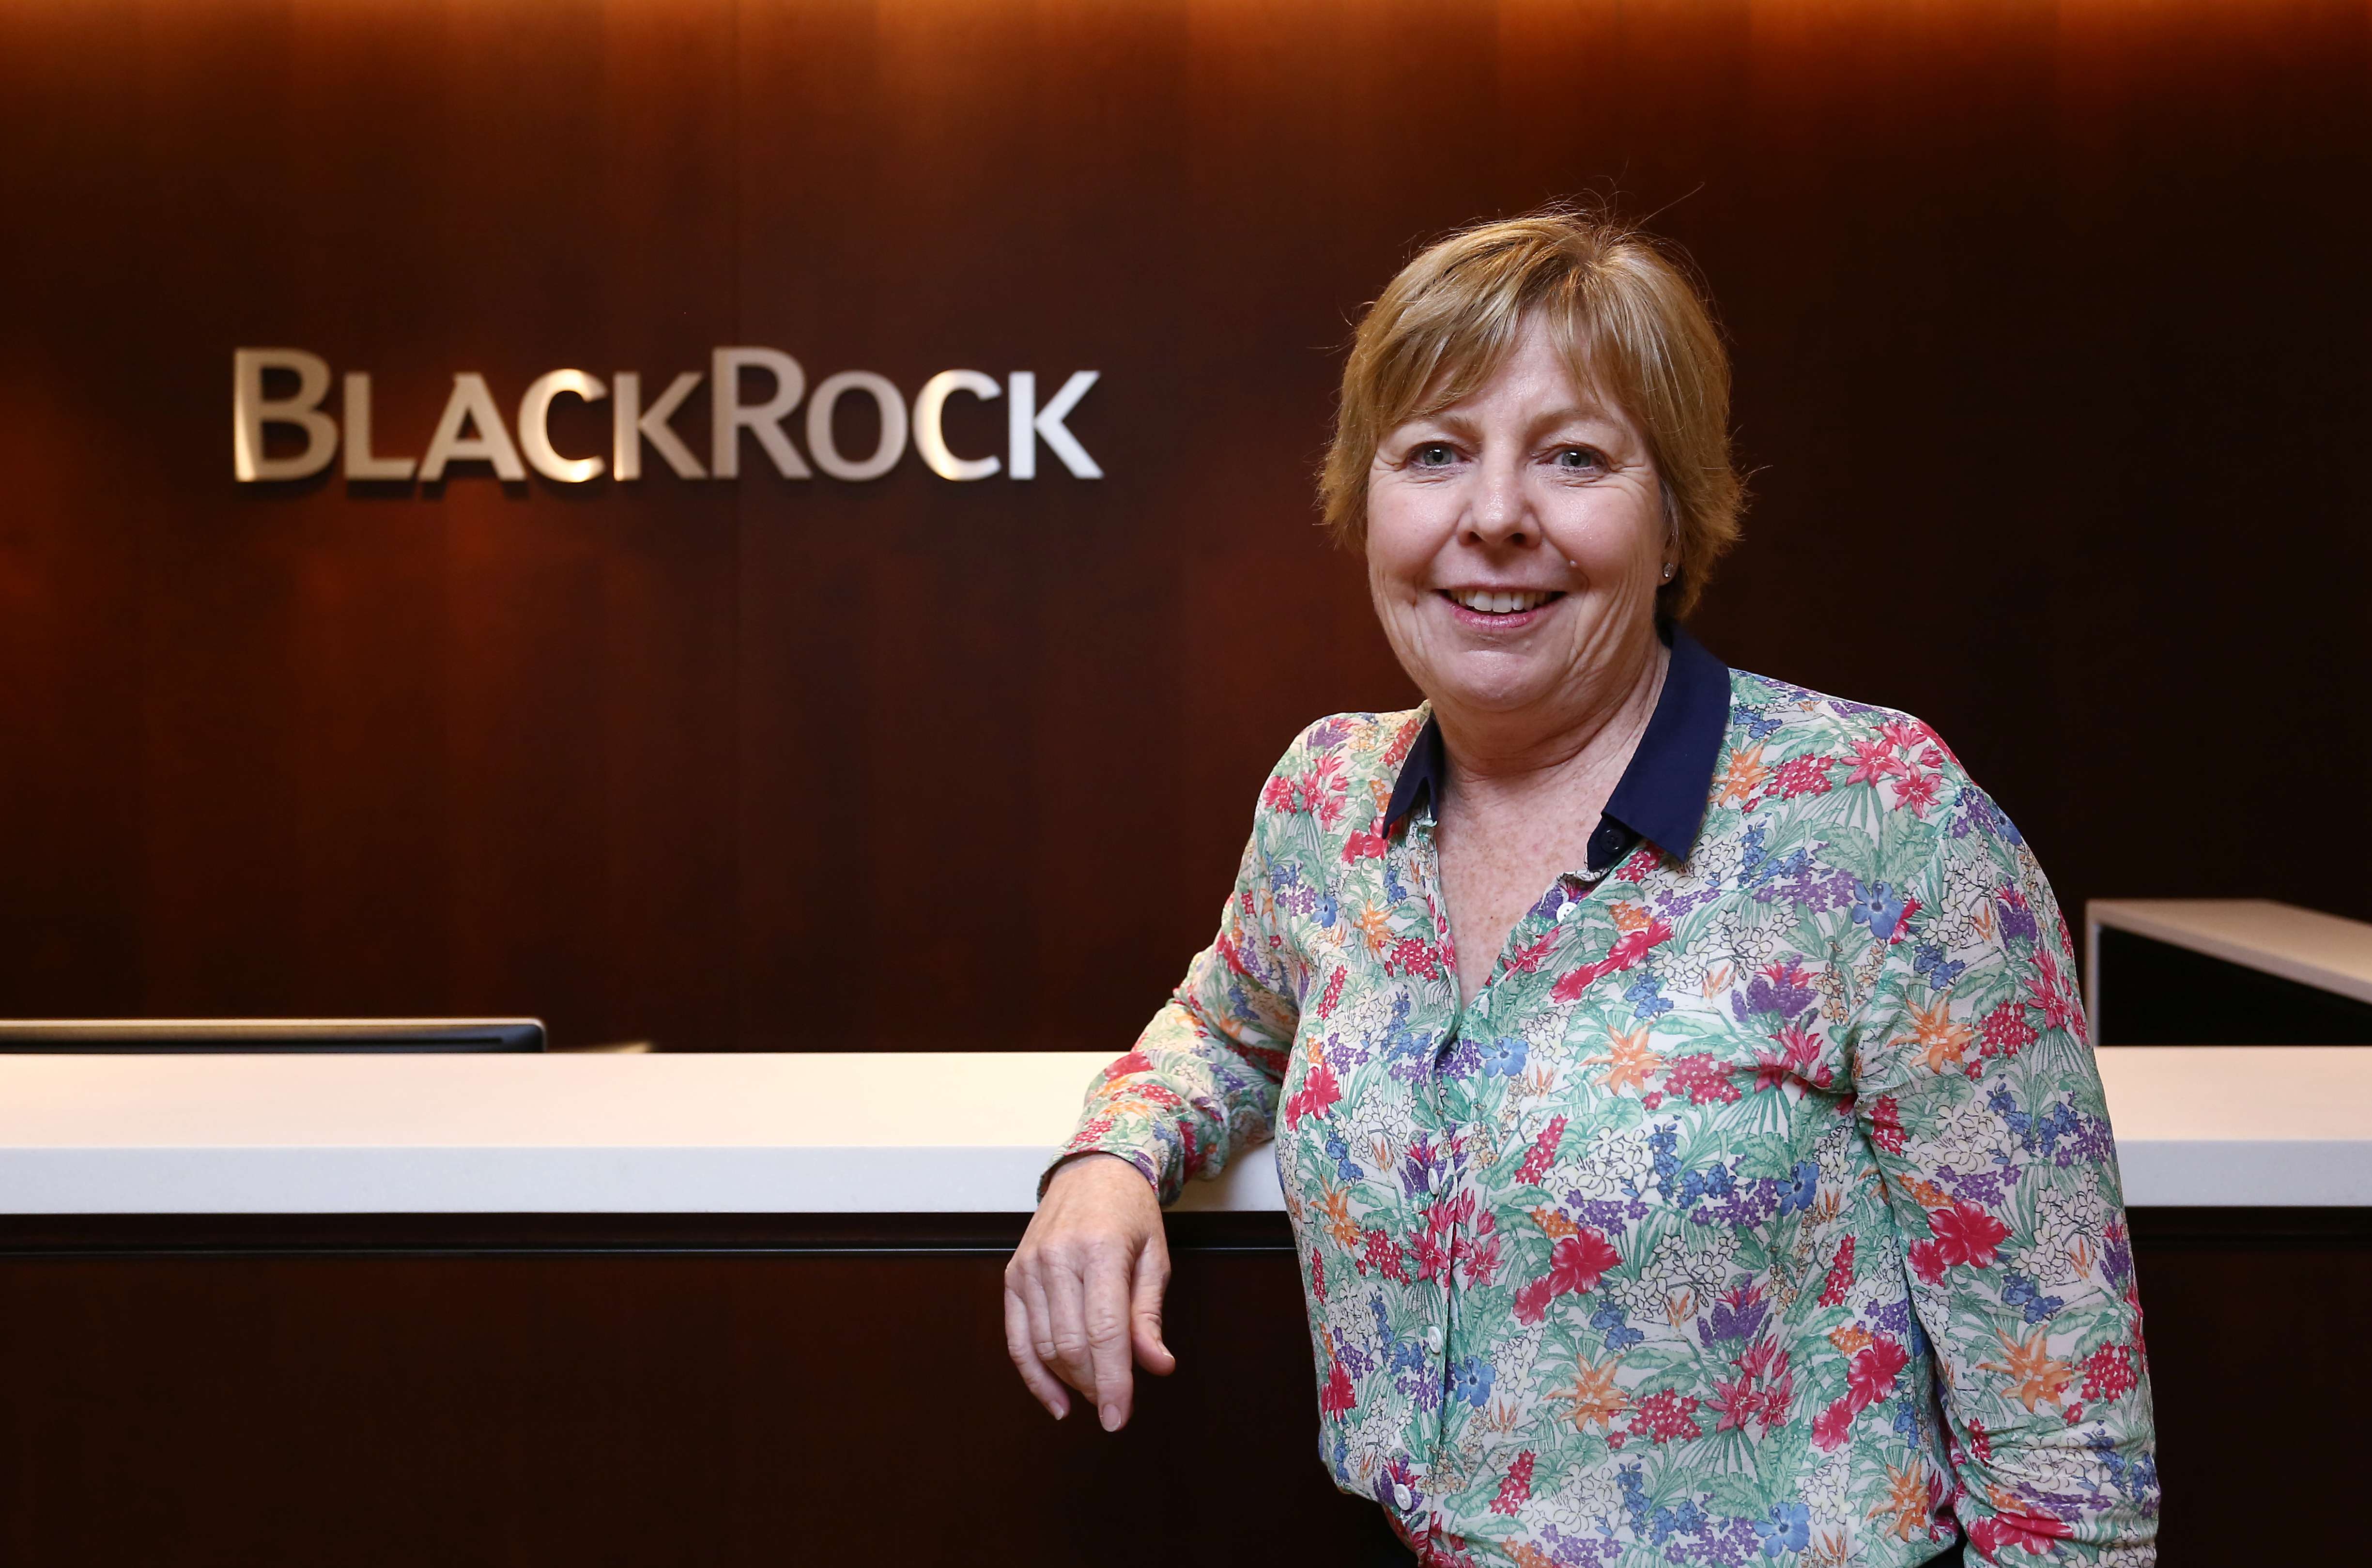 BlackRock’s Asia Pacific Head of Investment Stewardship Pru Bennett says the world’s largest asset manager wants to take an activist role to push for better corporate governance. Photo: SCMP